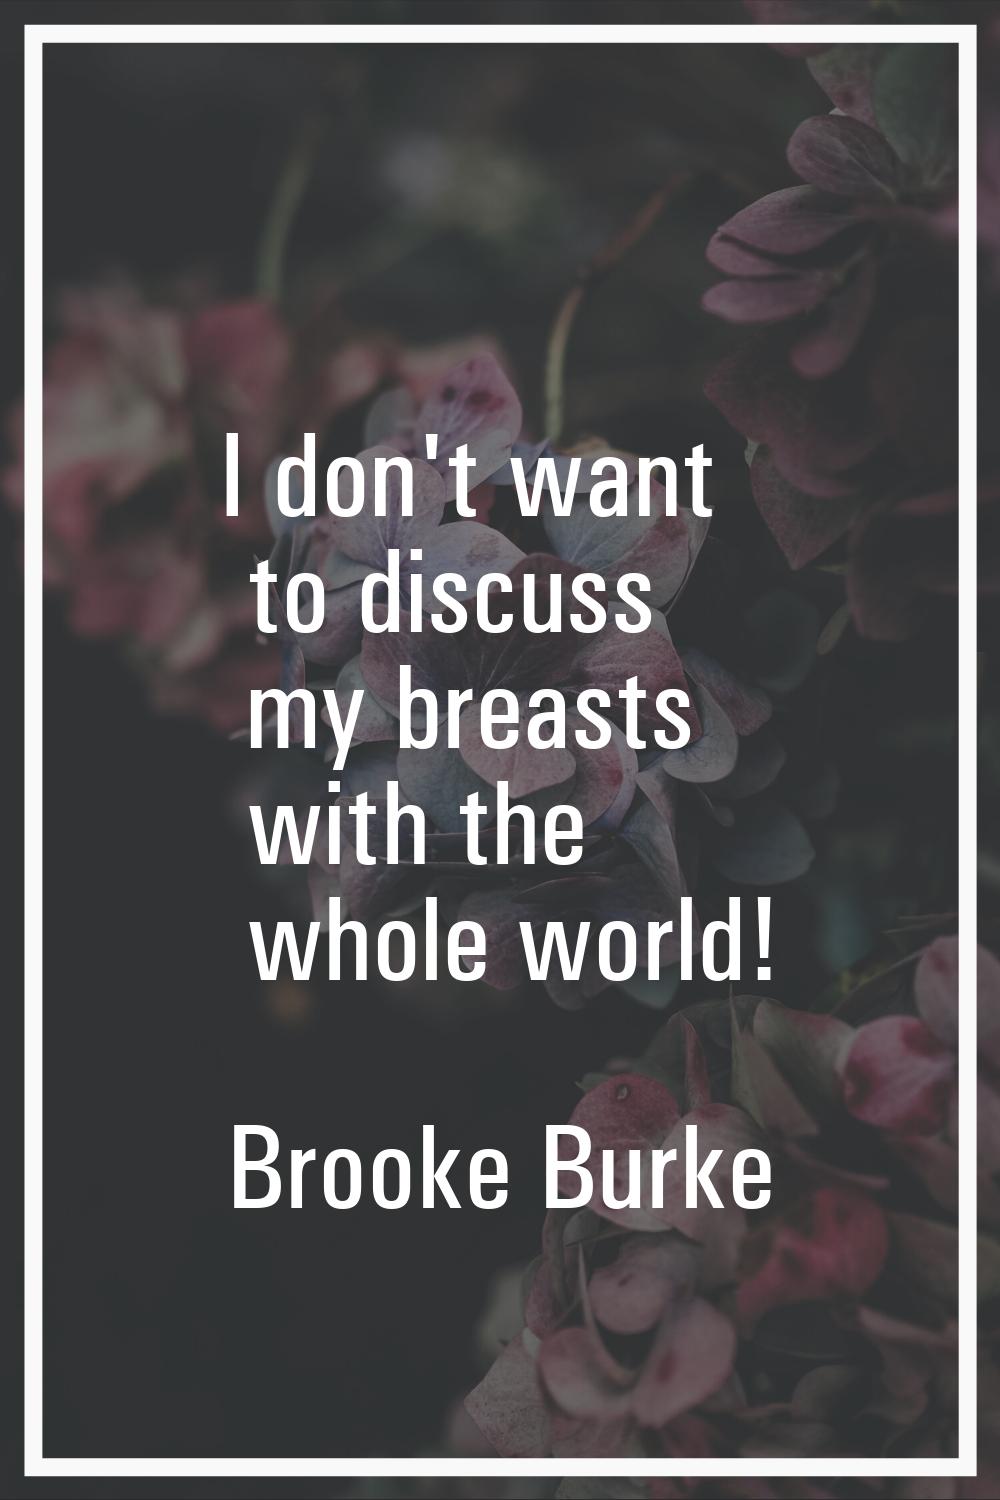 I don't want to discuss my breasts with the whole world!